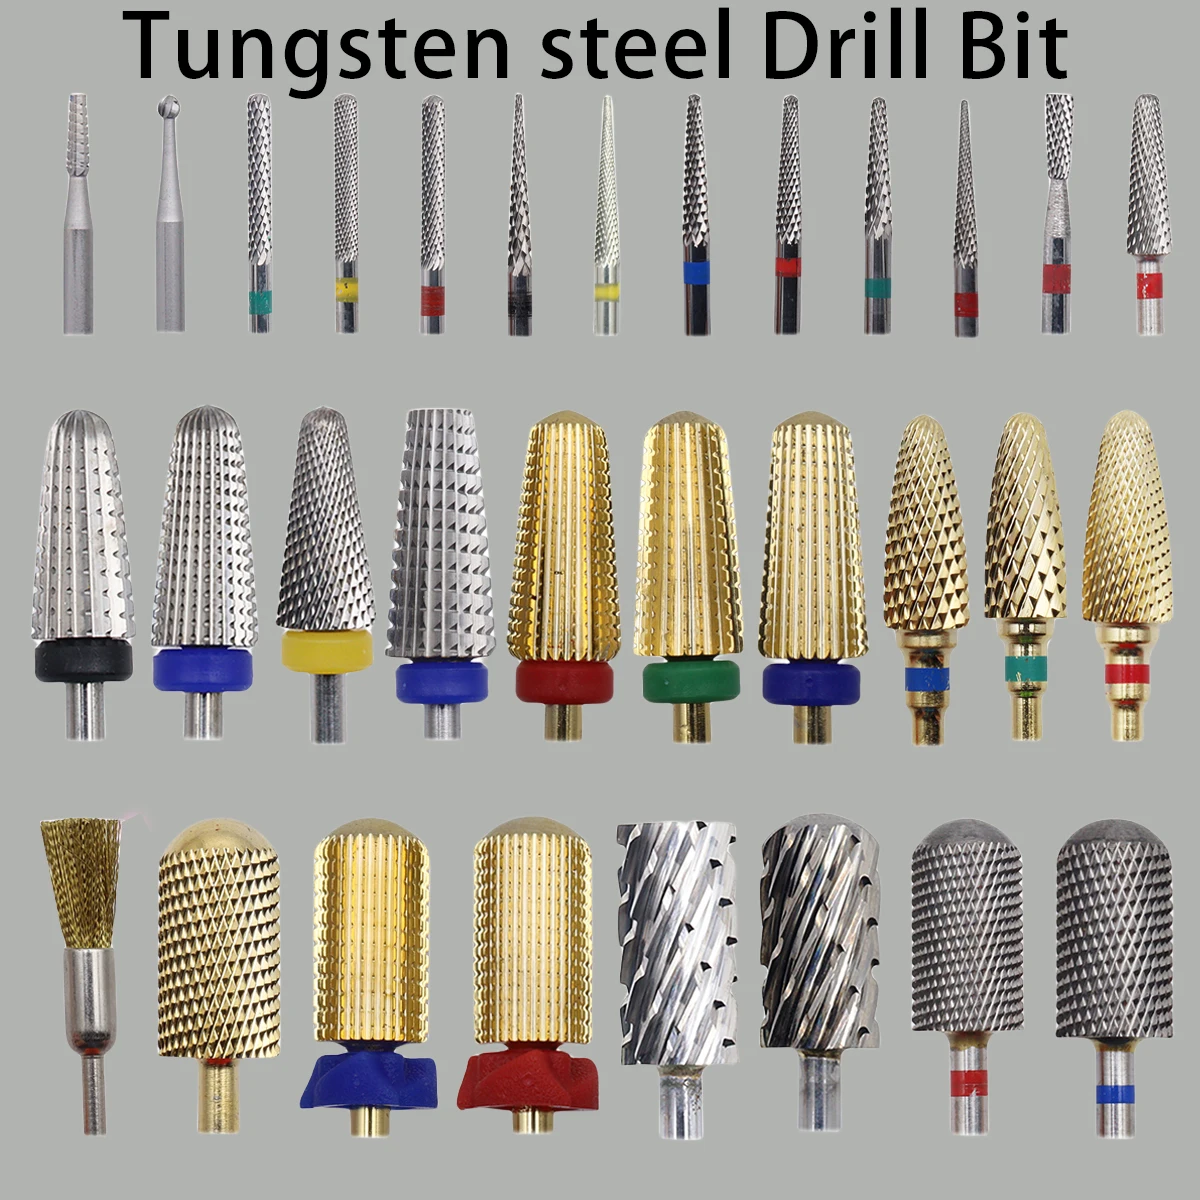 1pcs 60 Types Tungsten Carbide Nail Drill Bit Electric Nail Mills Cutter for Manicure Machine Nail Files Accessories 22 types electric nail drill bit gel polisher for manicure machine accessory rainbow tungsten carbide steel milling file cutter